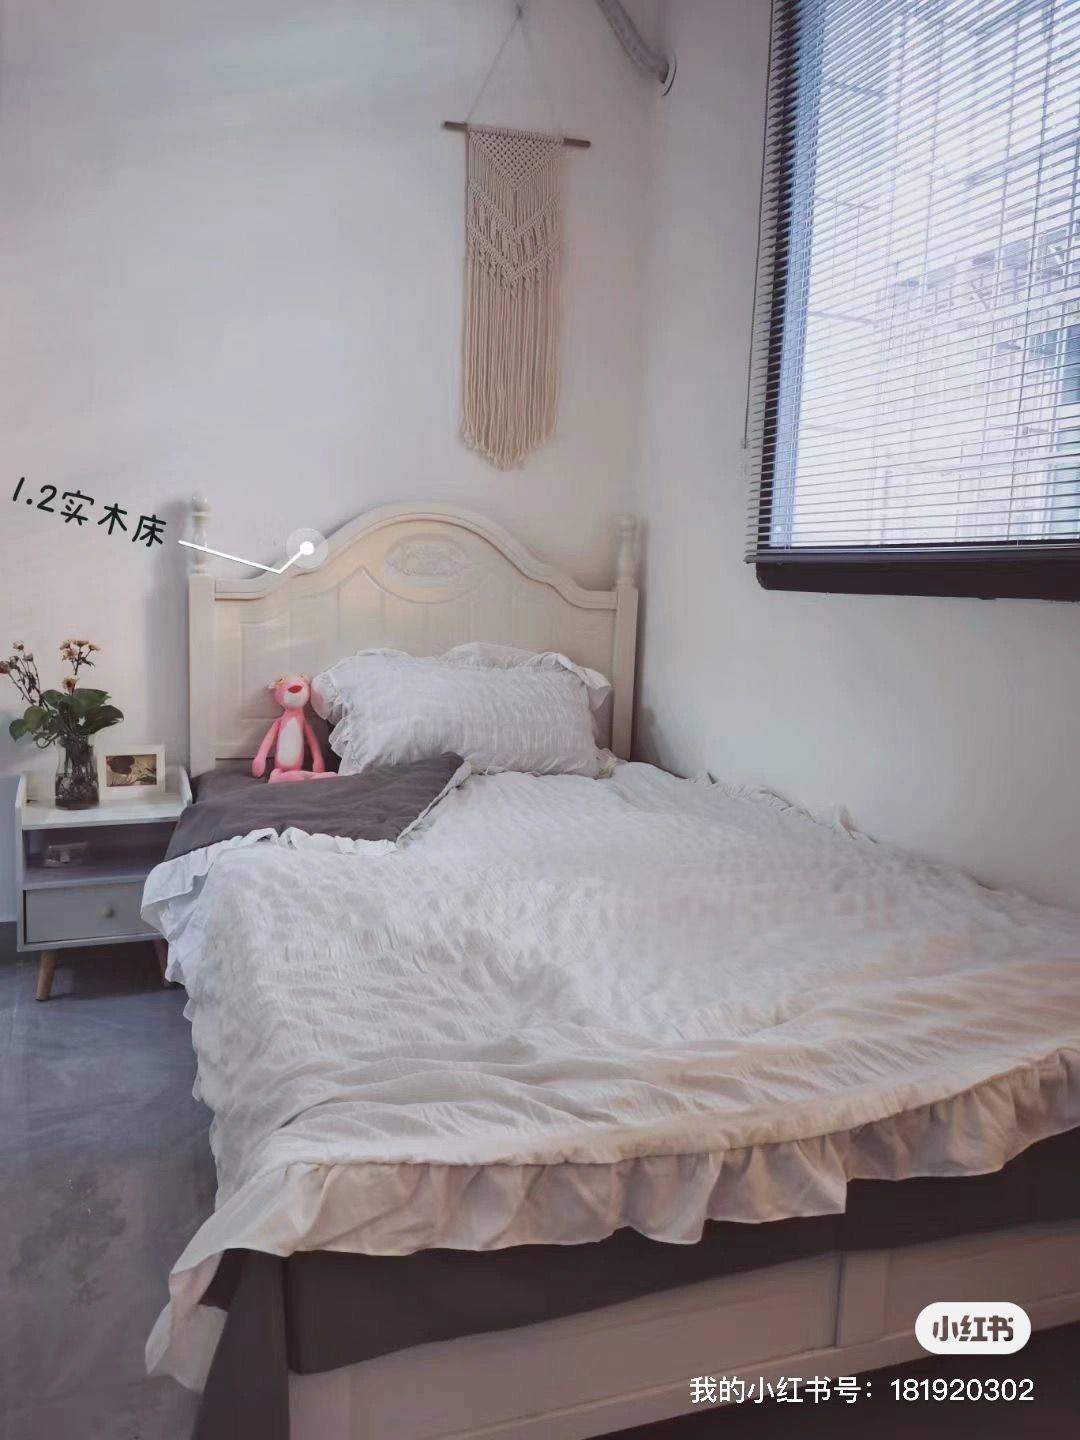 Changsha-Tianxin-Cozy Home,Clean&Comfy,No Gender Limit,Hustle & Bustle,Chilled